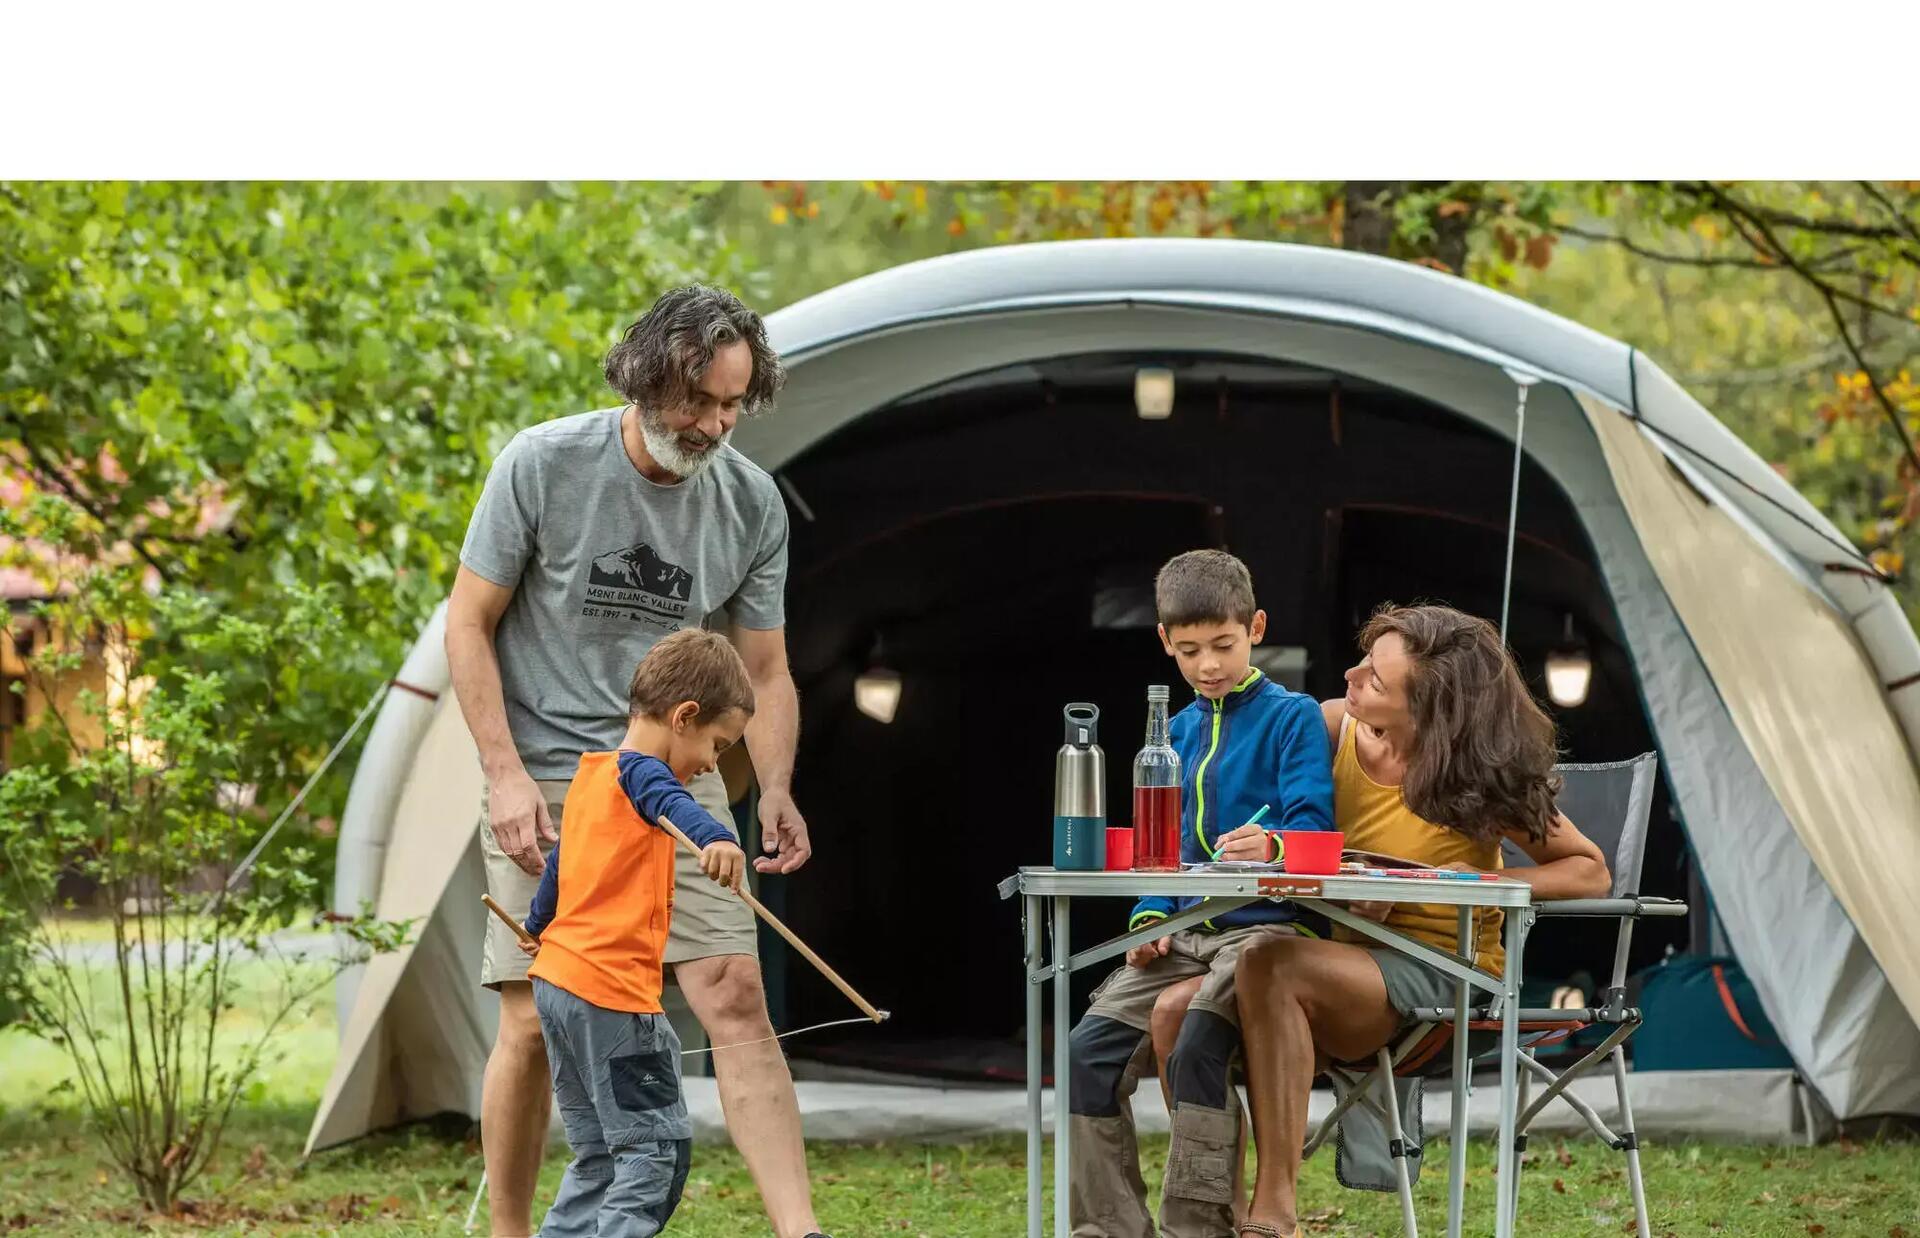 Family camping outside in greenery